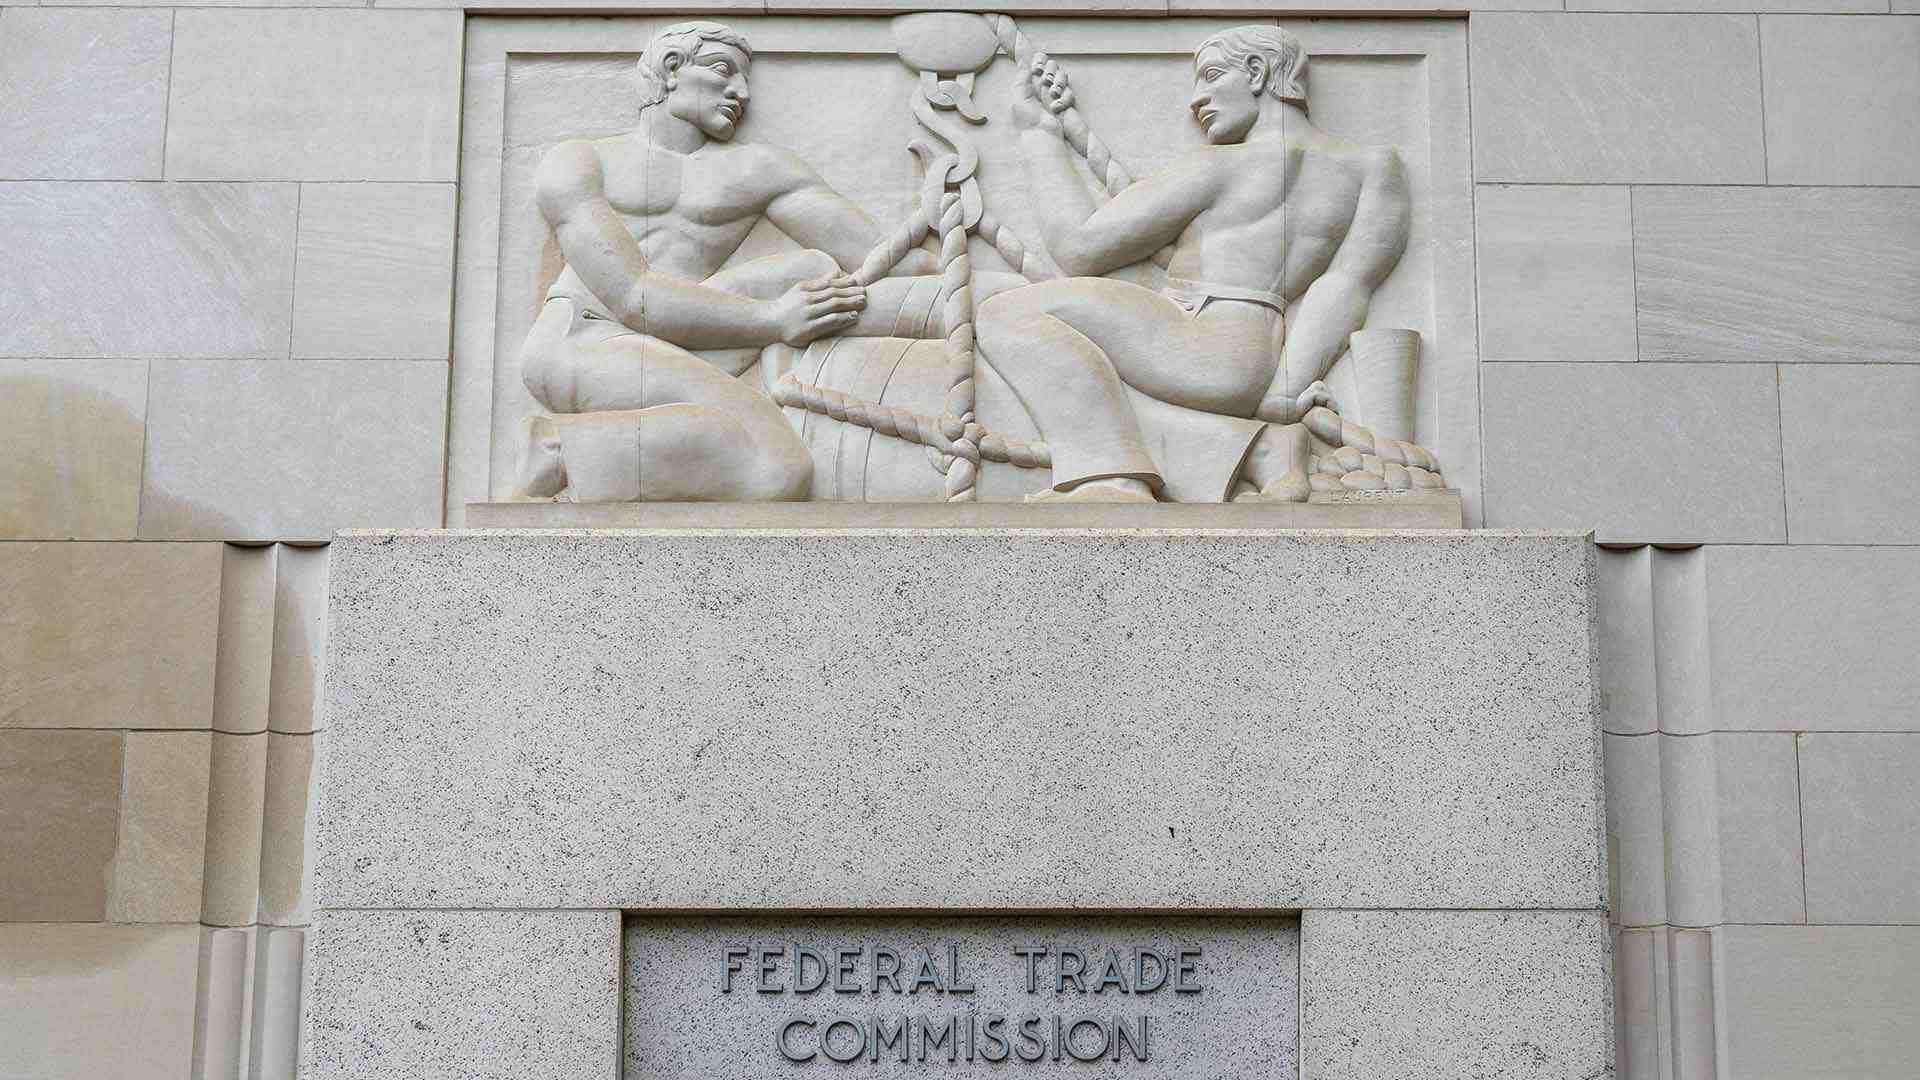 Federal Trade Commission building exterior